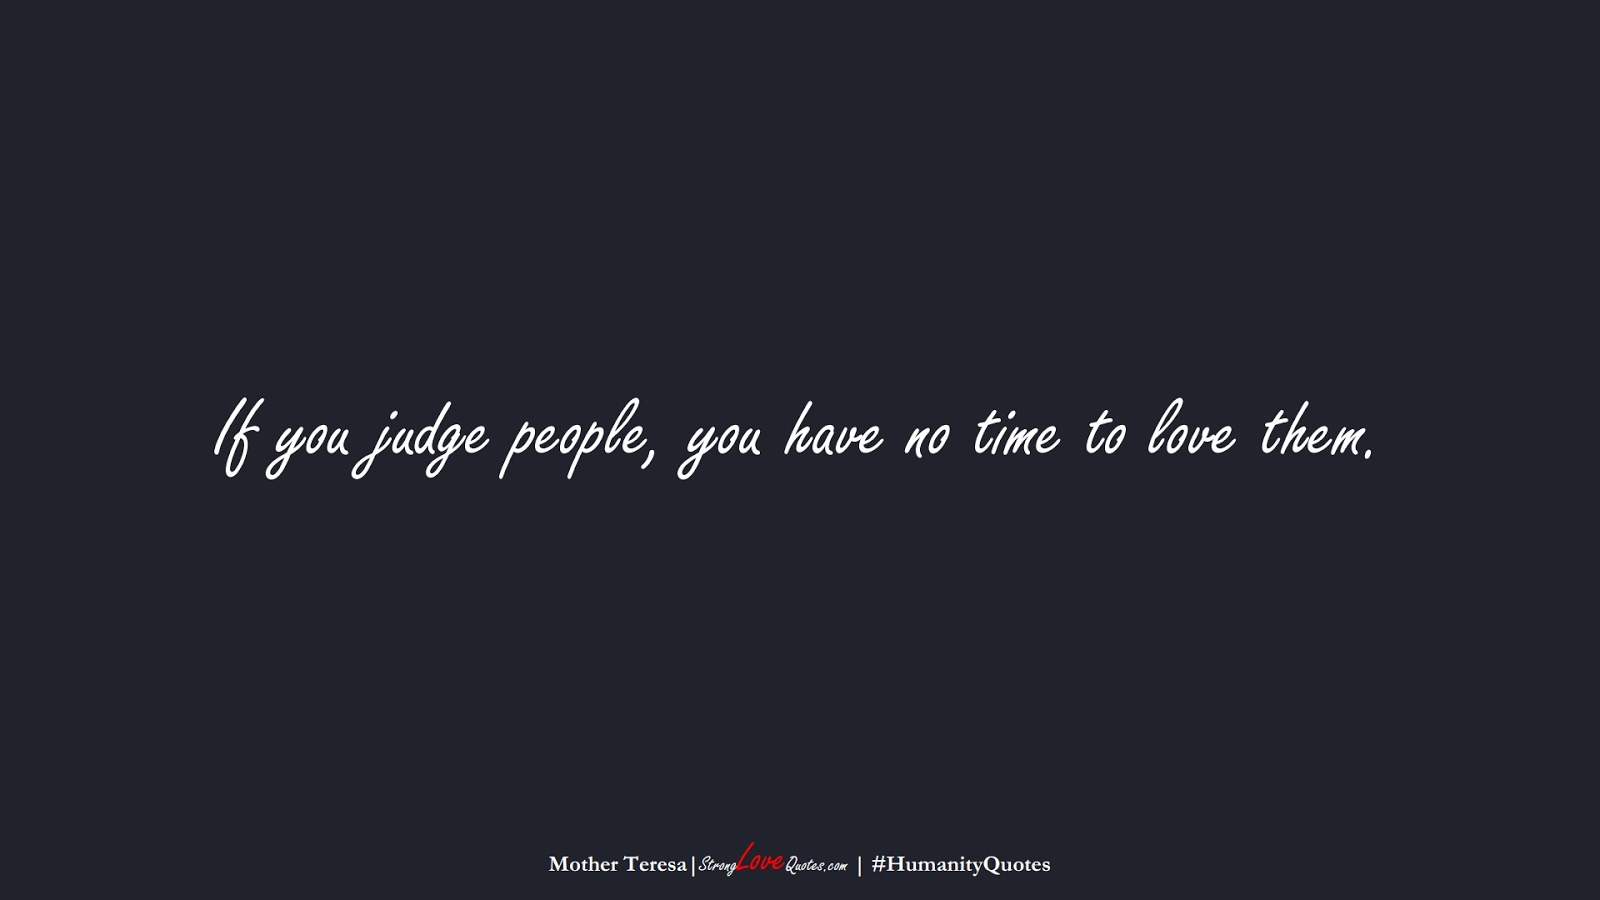 If you judge people, you have no time to love them. (Mother Teresa);  #HumanityQuotes